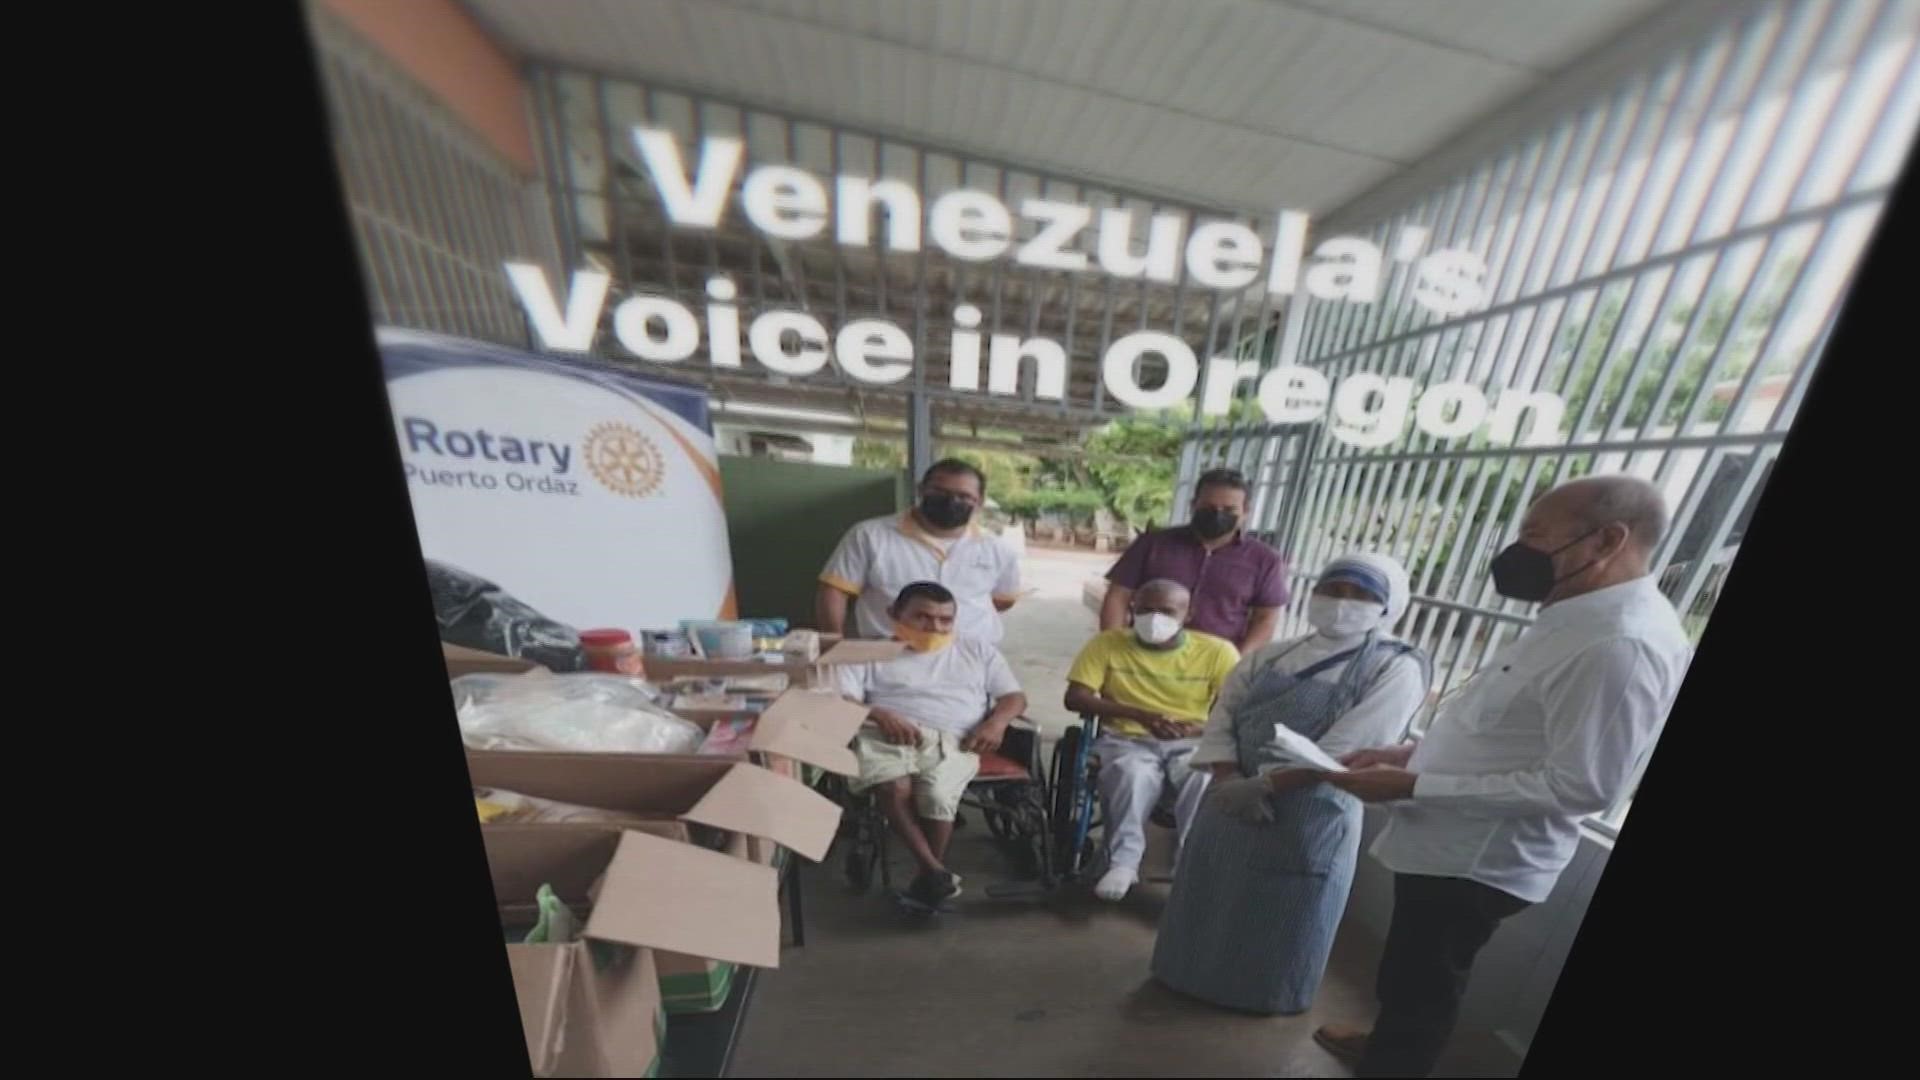 Giselle Rincon is the cofounder of the non-profit Venezuela's Voice in Oregon. She and several volunteers continuously raise money.